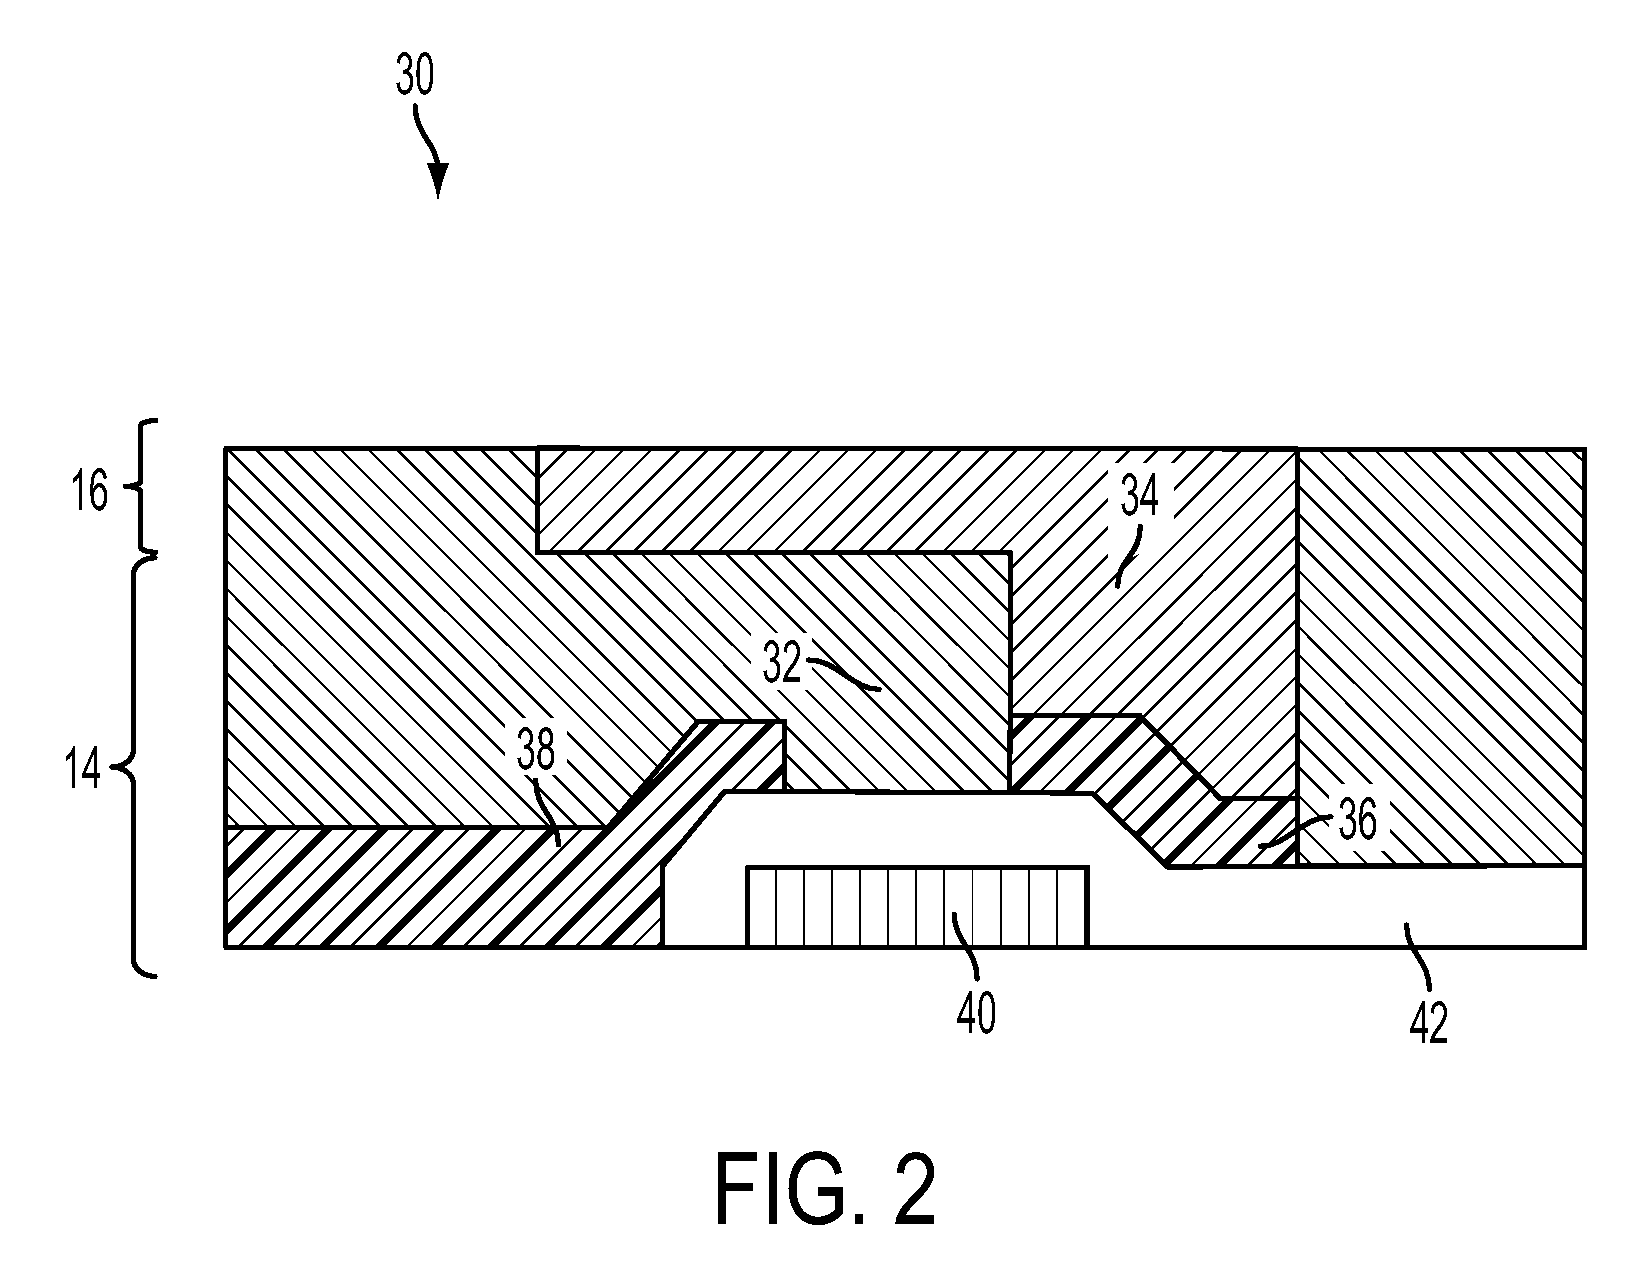 Image forming apparatus with a TFT backplane for xerography without a light source